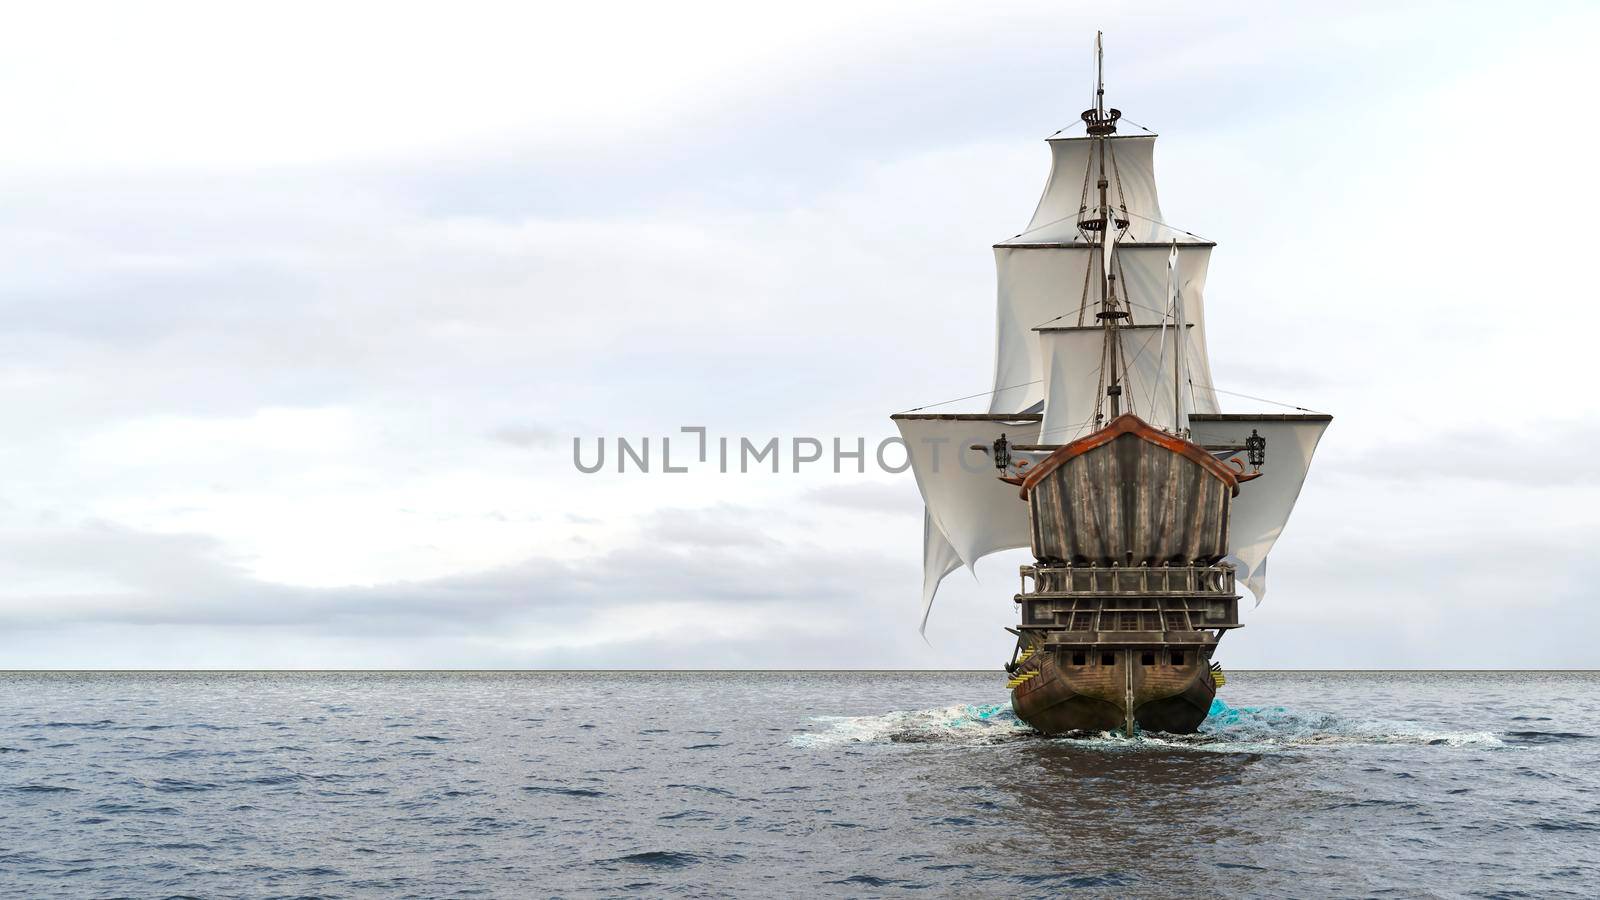 A medieval frigate sailing on a boundless blue sea. Concept of sea adventures in the middle ages.